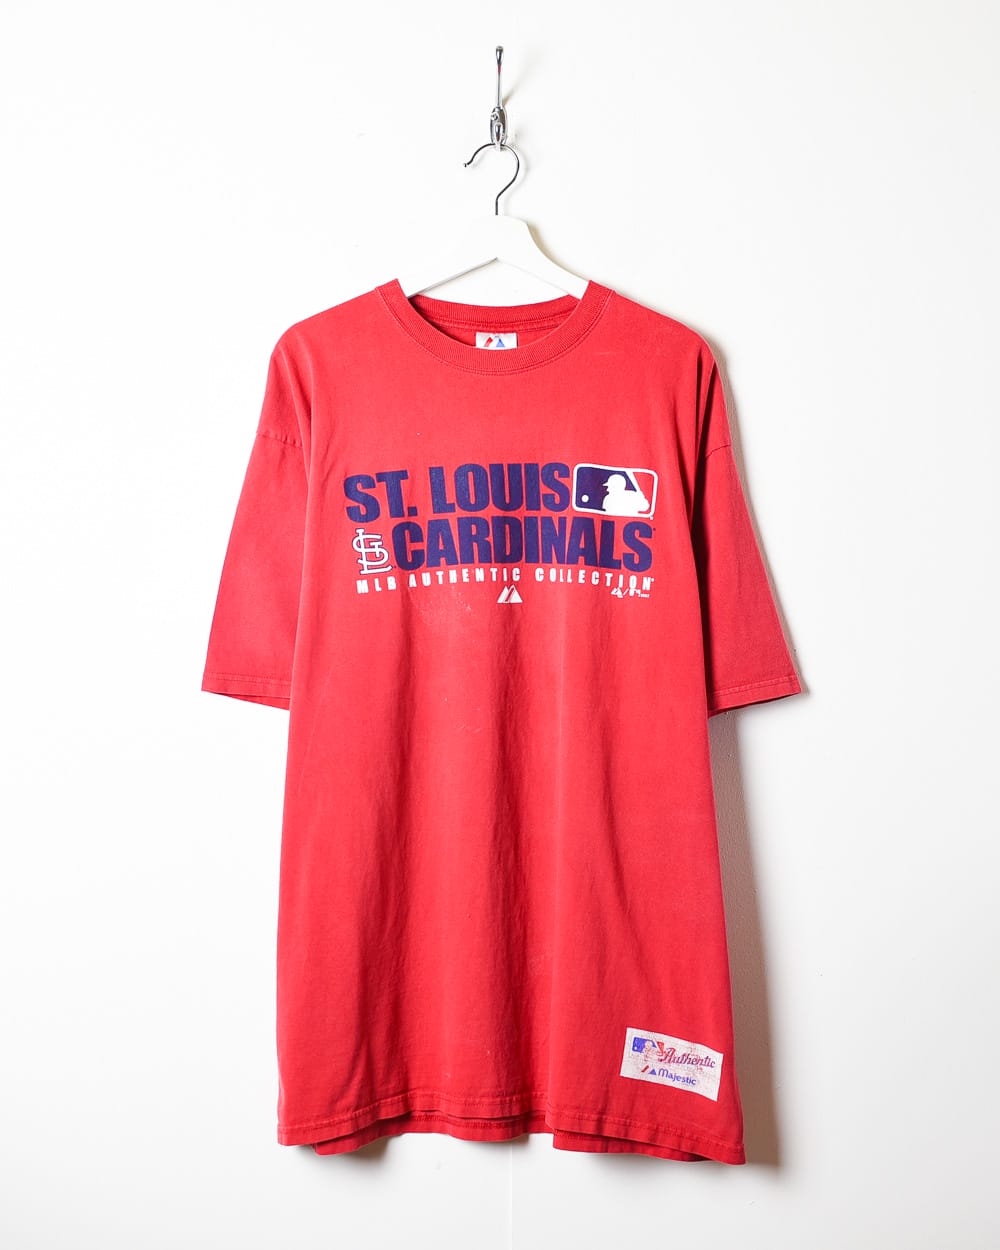 Vintage 00s Red Majestic MLB St. Louis Cardinals T-Shirt - X-Large